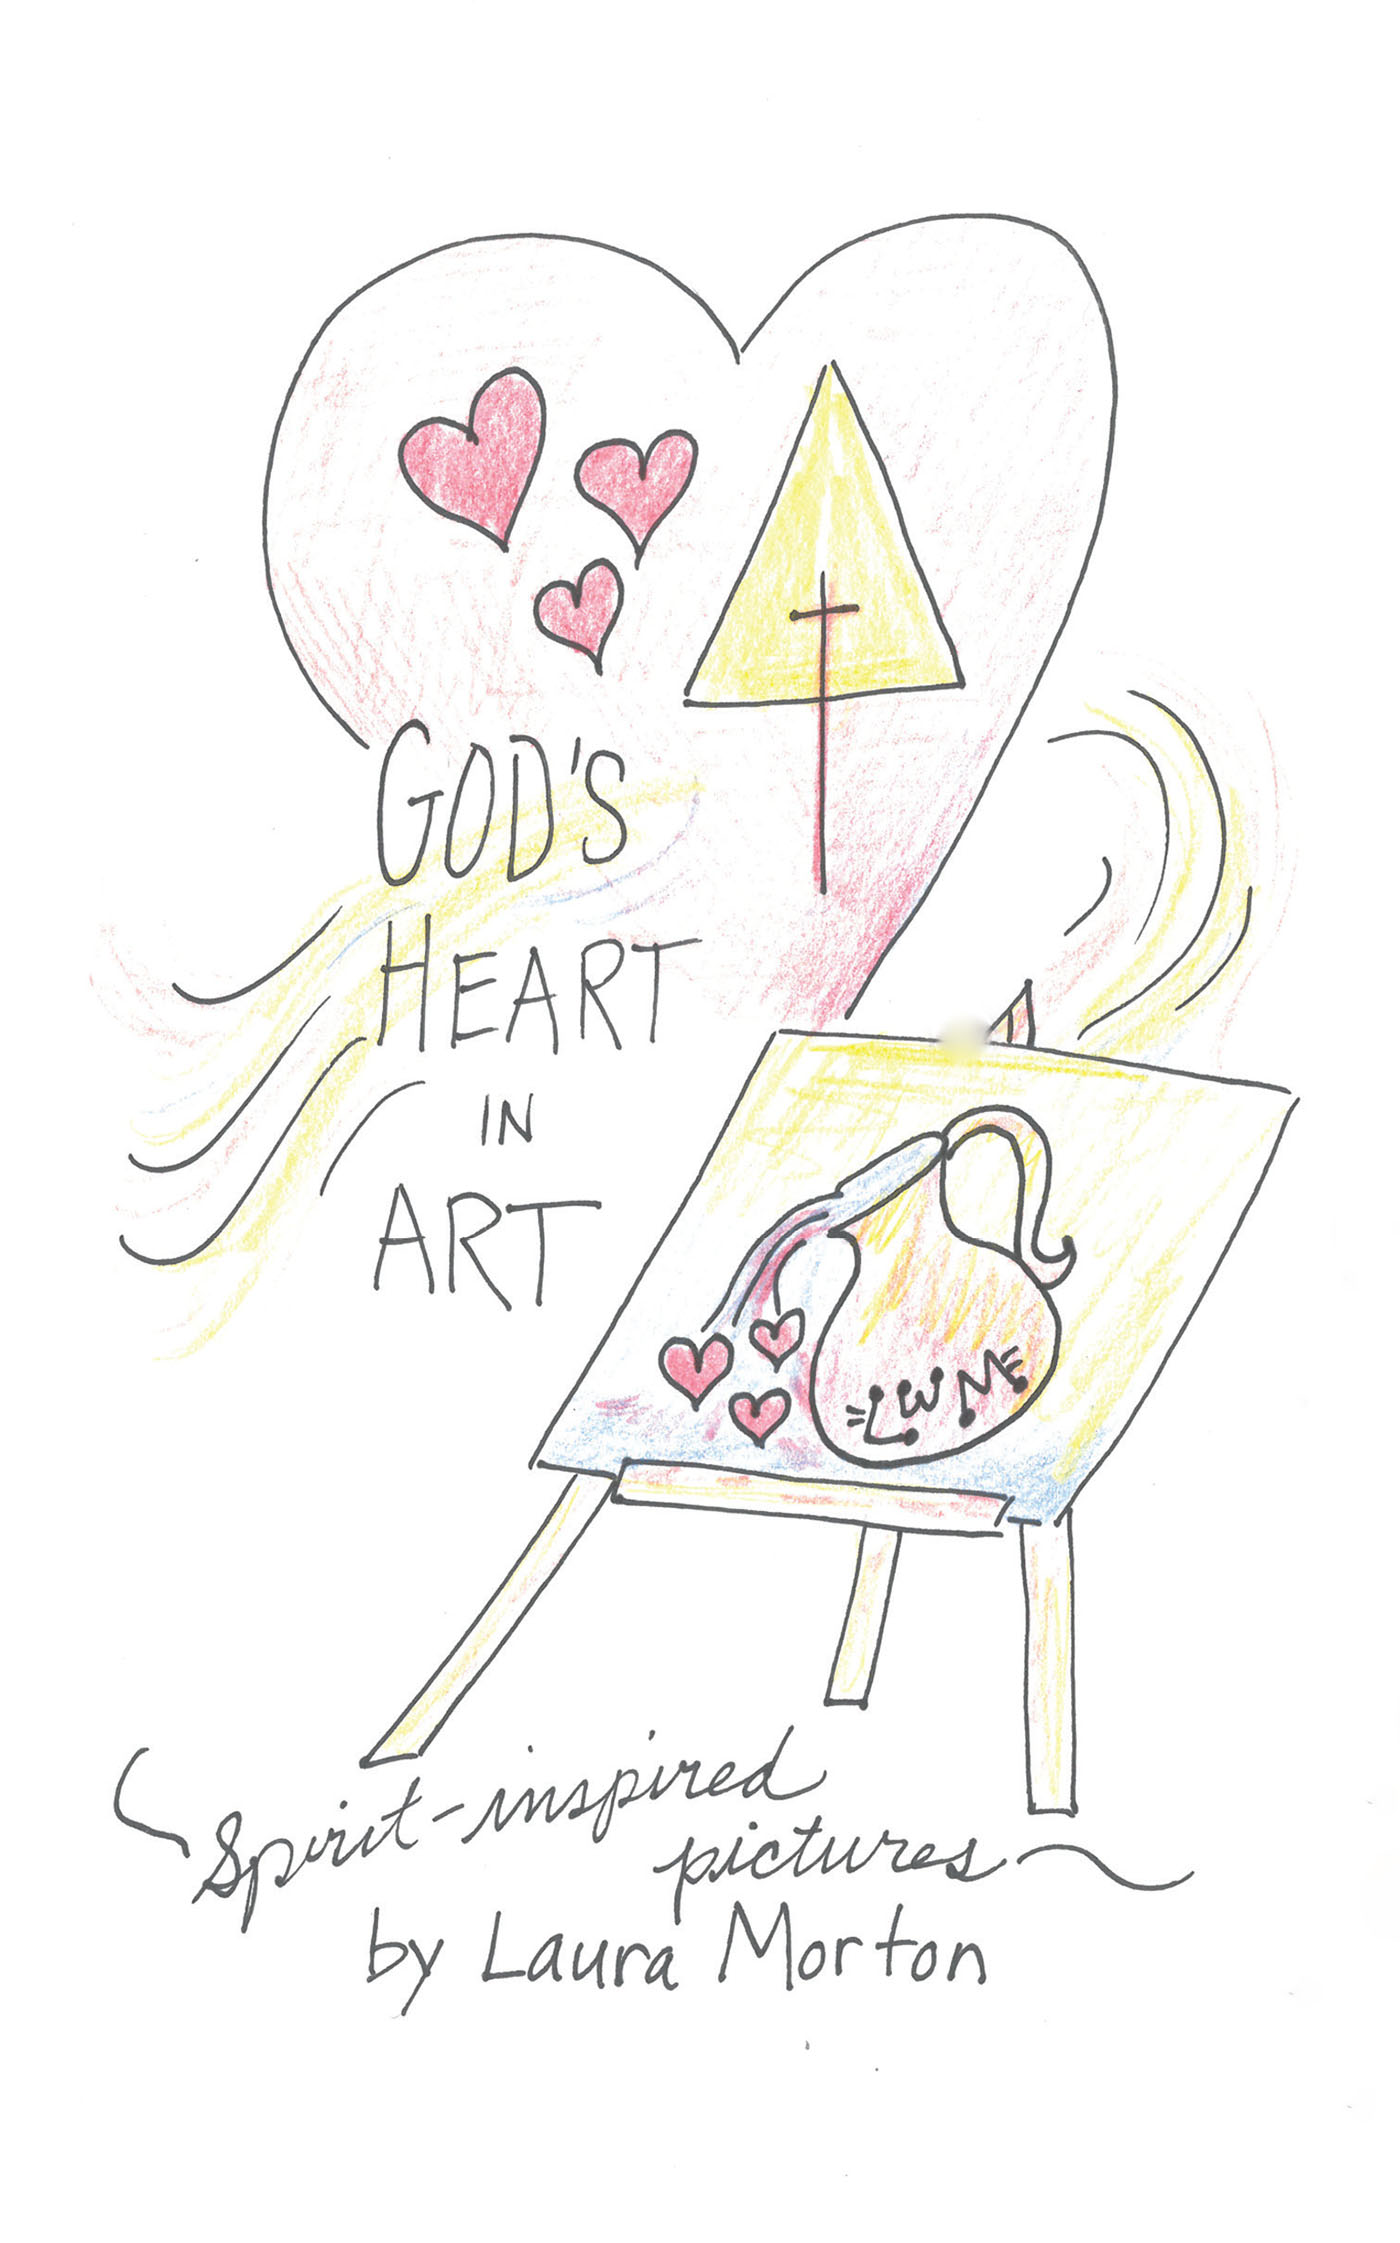 Laura Morton’s Newly Released "God’s Heart in Art" is a Visually Engaging Devotional Experience That Empowers and Encourages